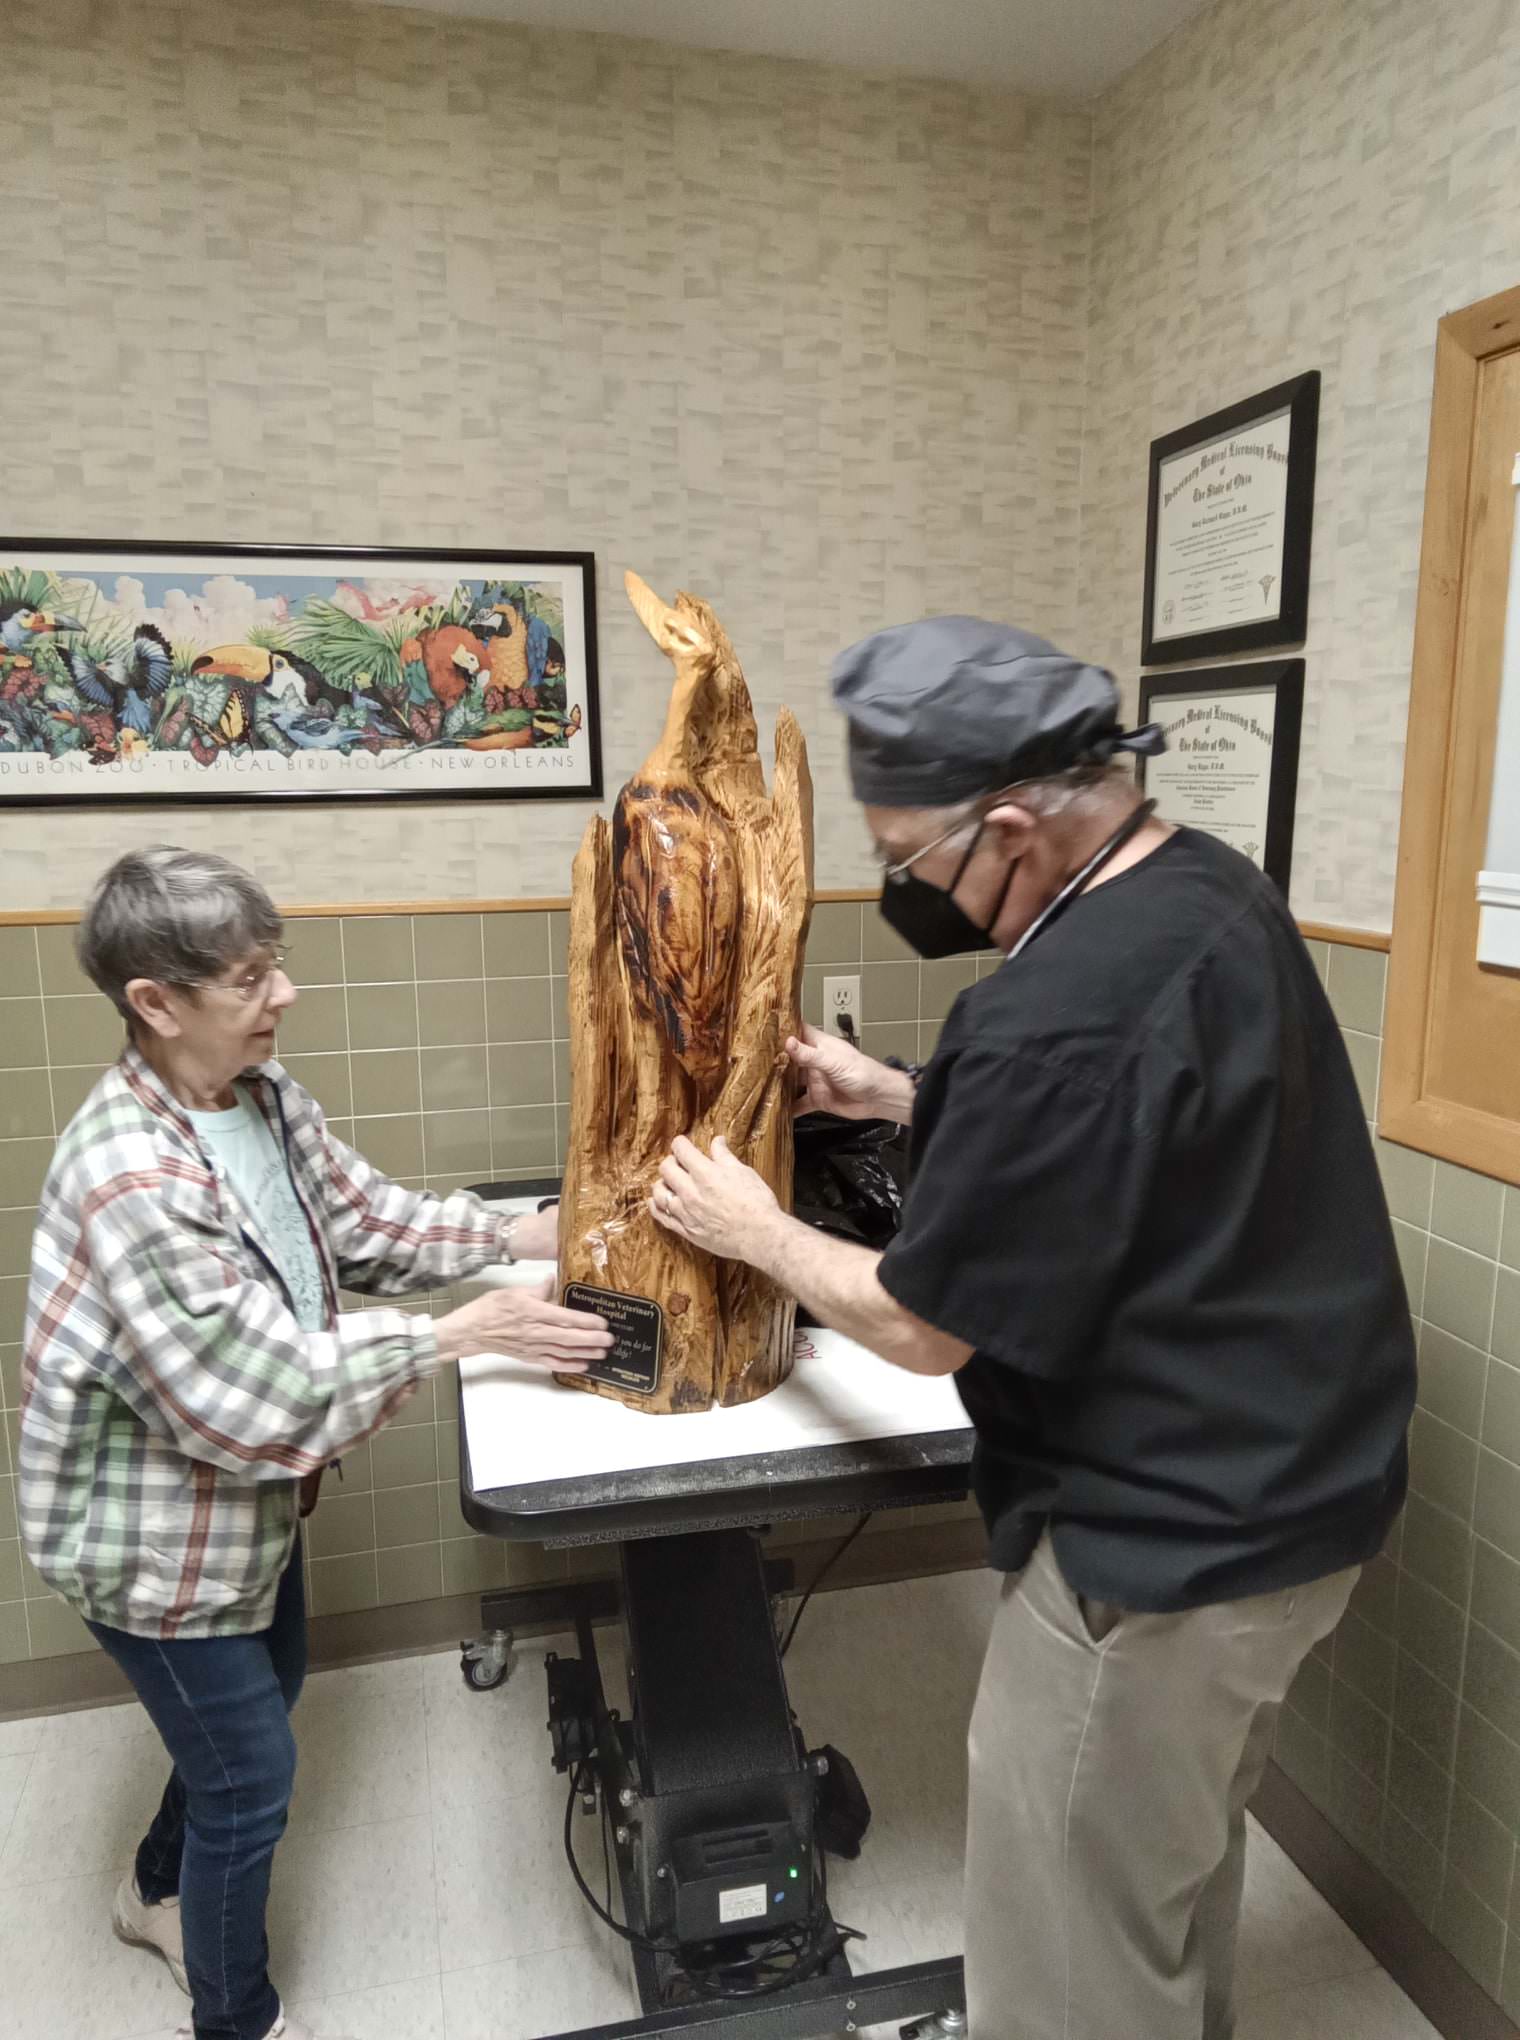 Today Laura Jordan of Medina Raptor Center and Fran Kitchen of Operation Orphan Wildlife Rehabilitation, Inc. presented Dr. Riggs and Metropolitan Veterinary Hospital with this beautiful carving of a Heron for all the work that they do for wildlife.